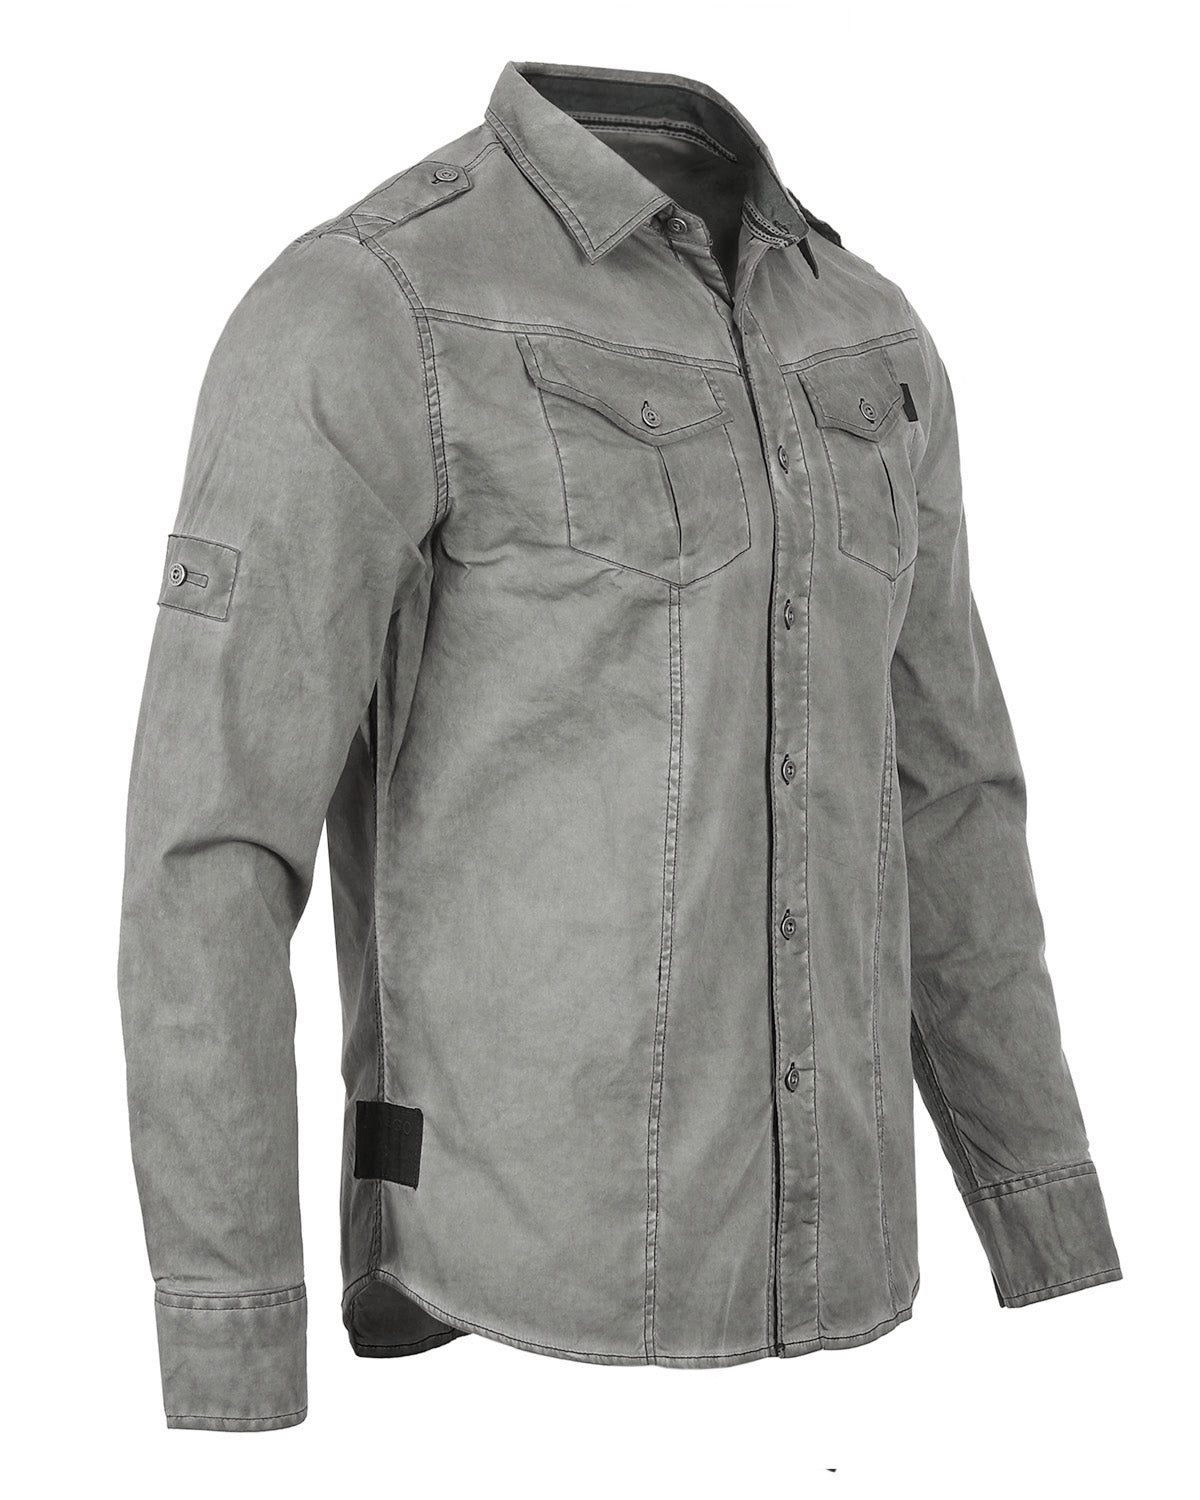 Men's Stretch Roll-Up Sleeve Color Washed Vintage Rugged Button Shirt Grey